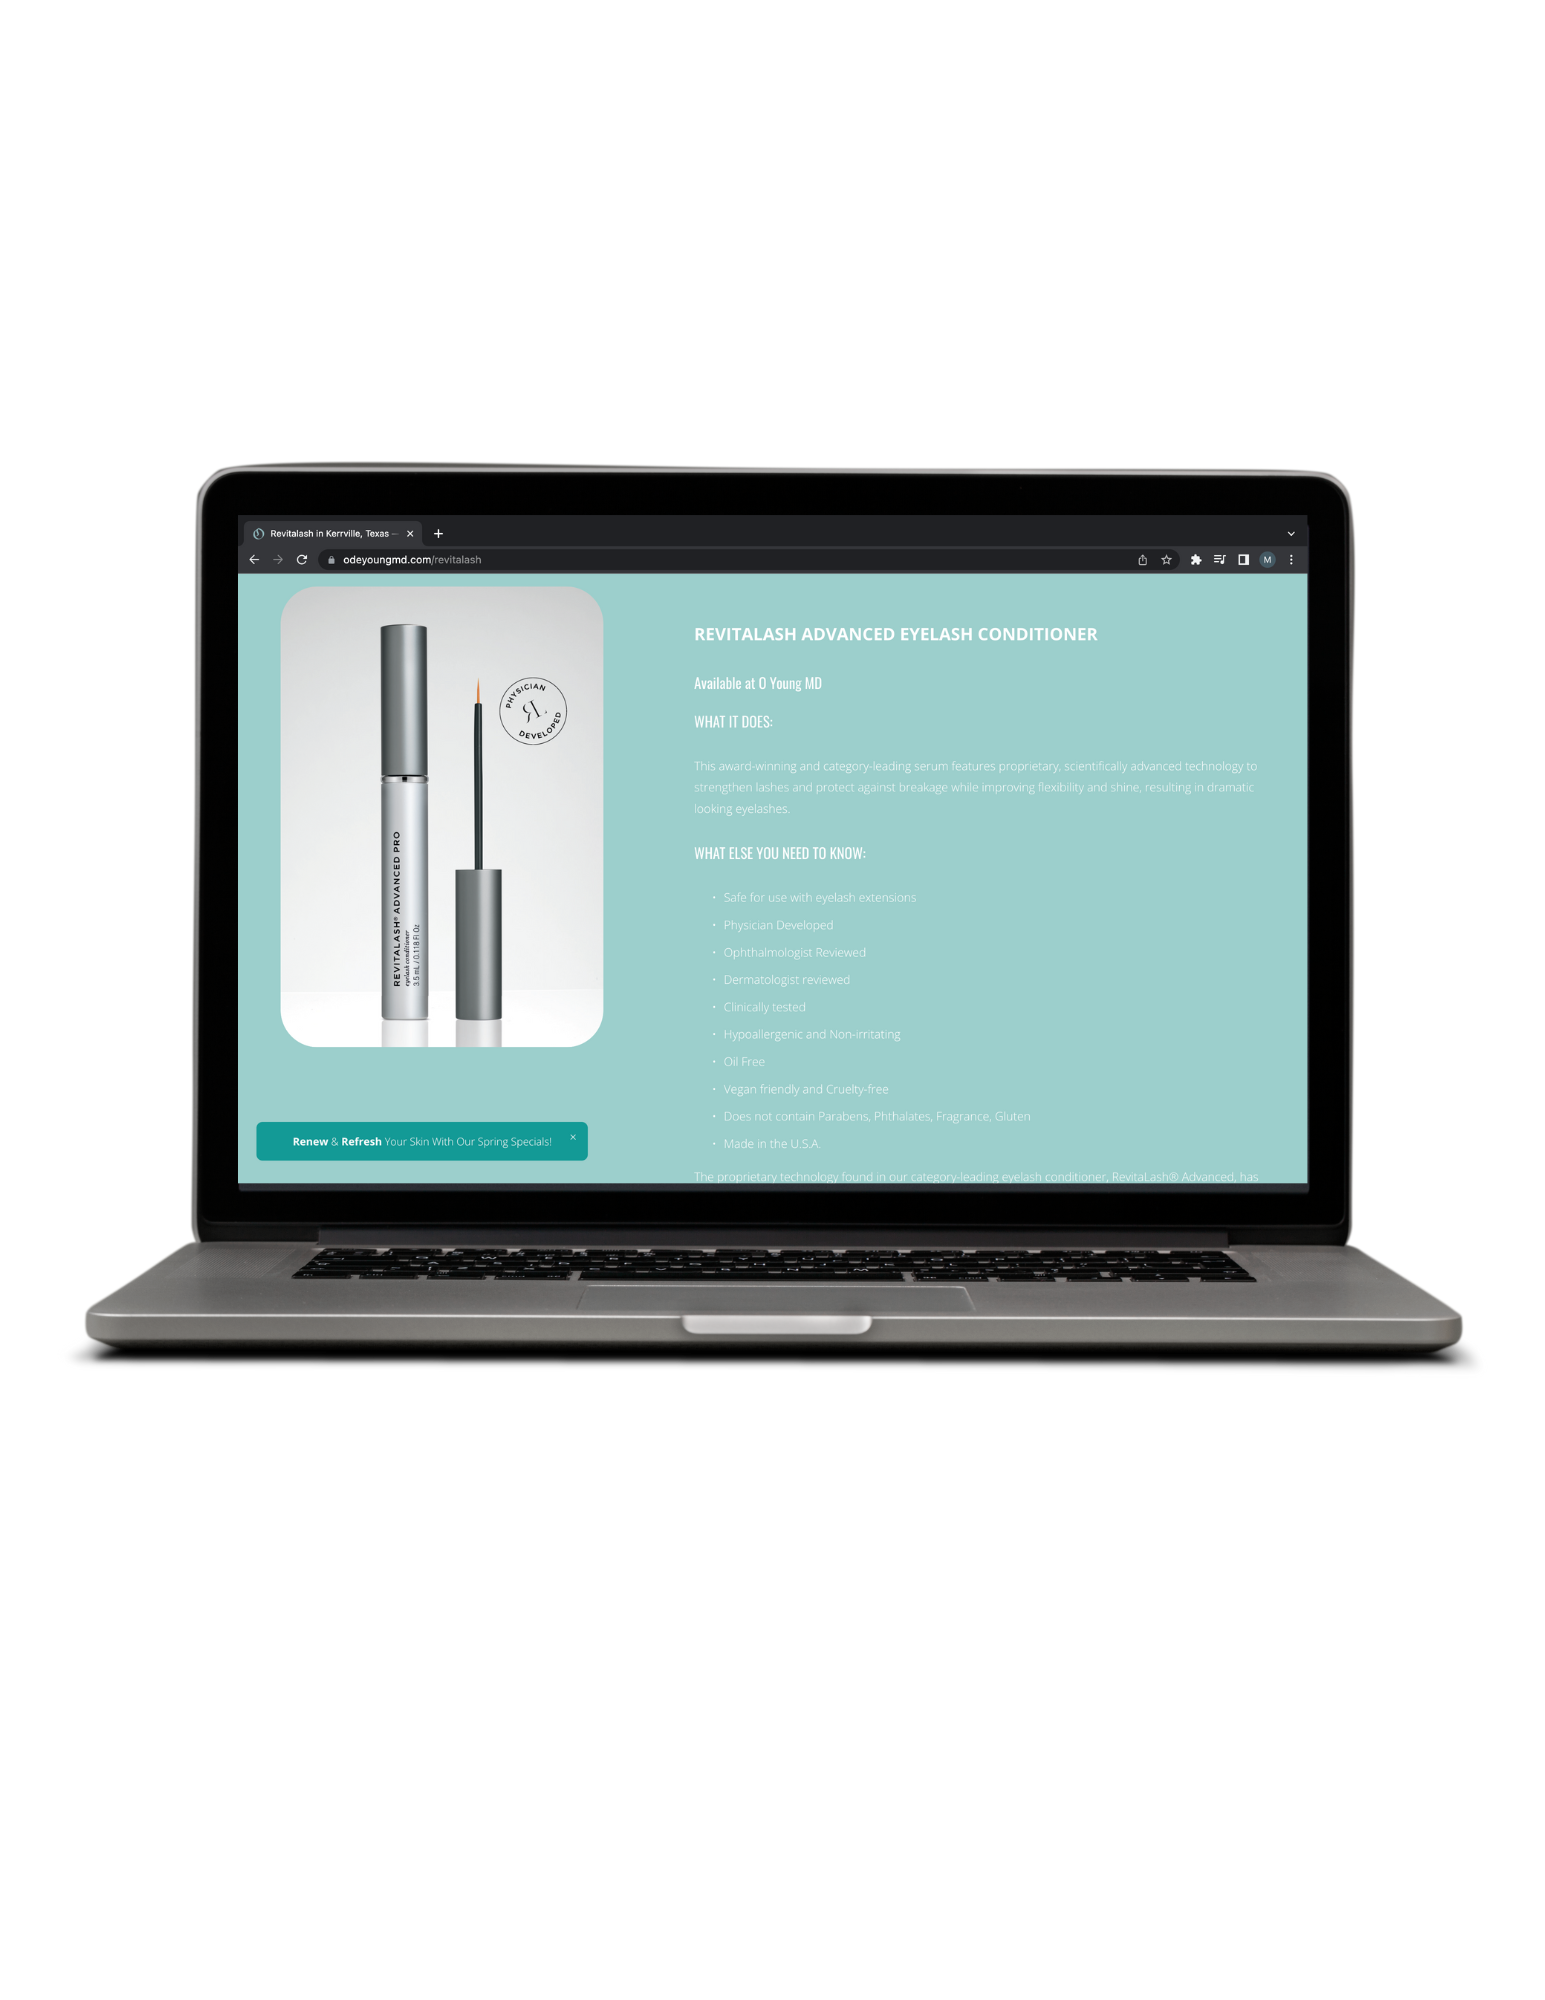 Product Page - Marketing Agency - Medical Aesthetics